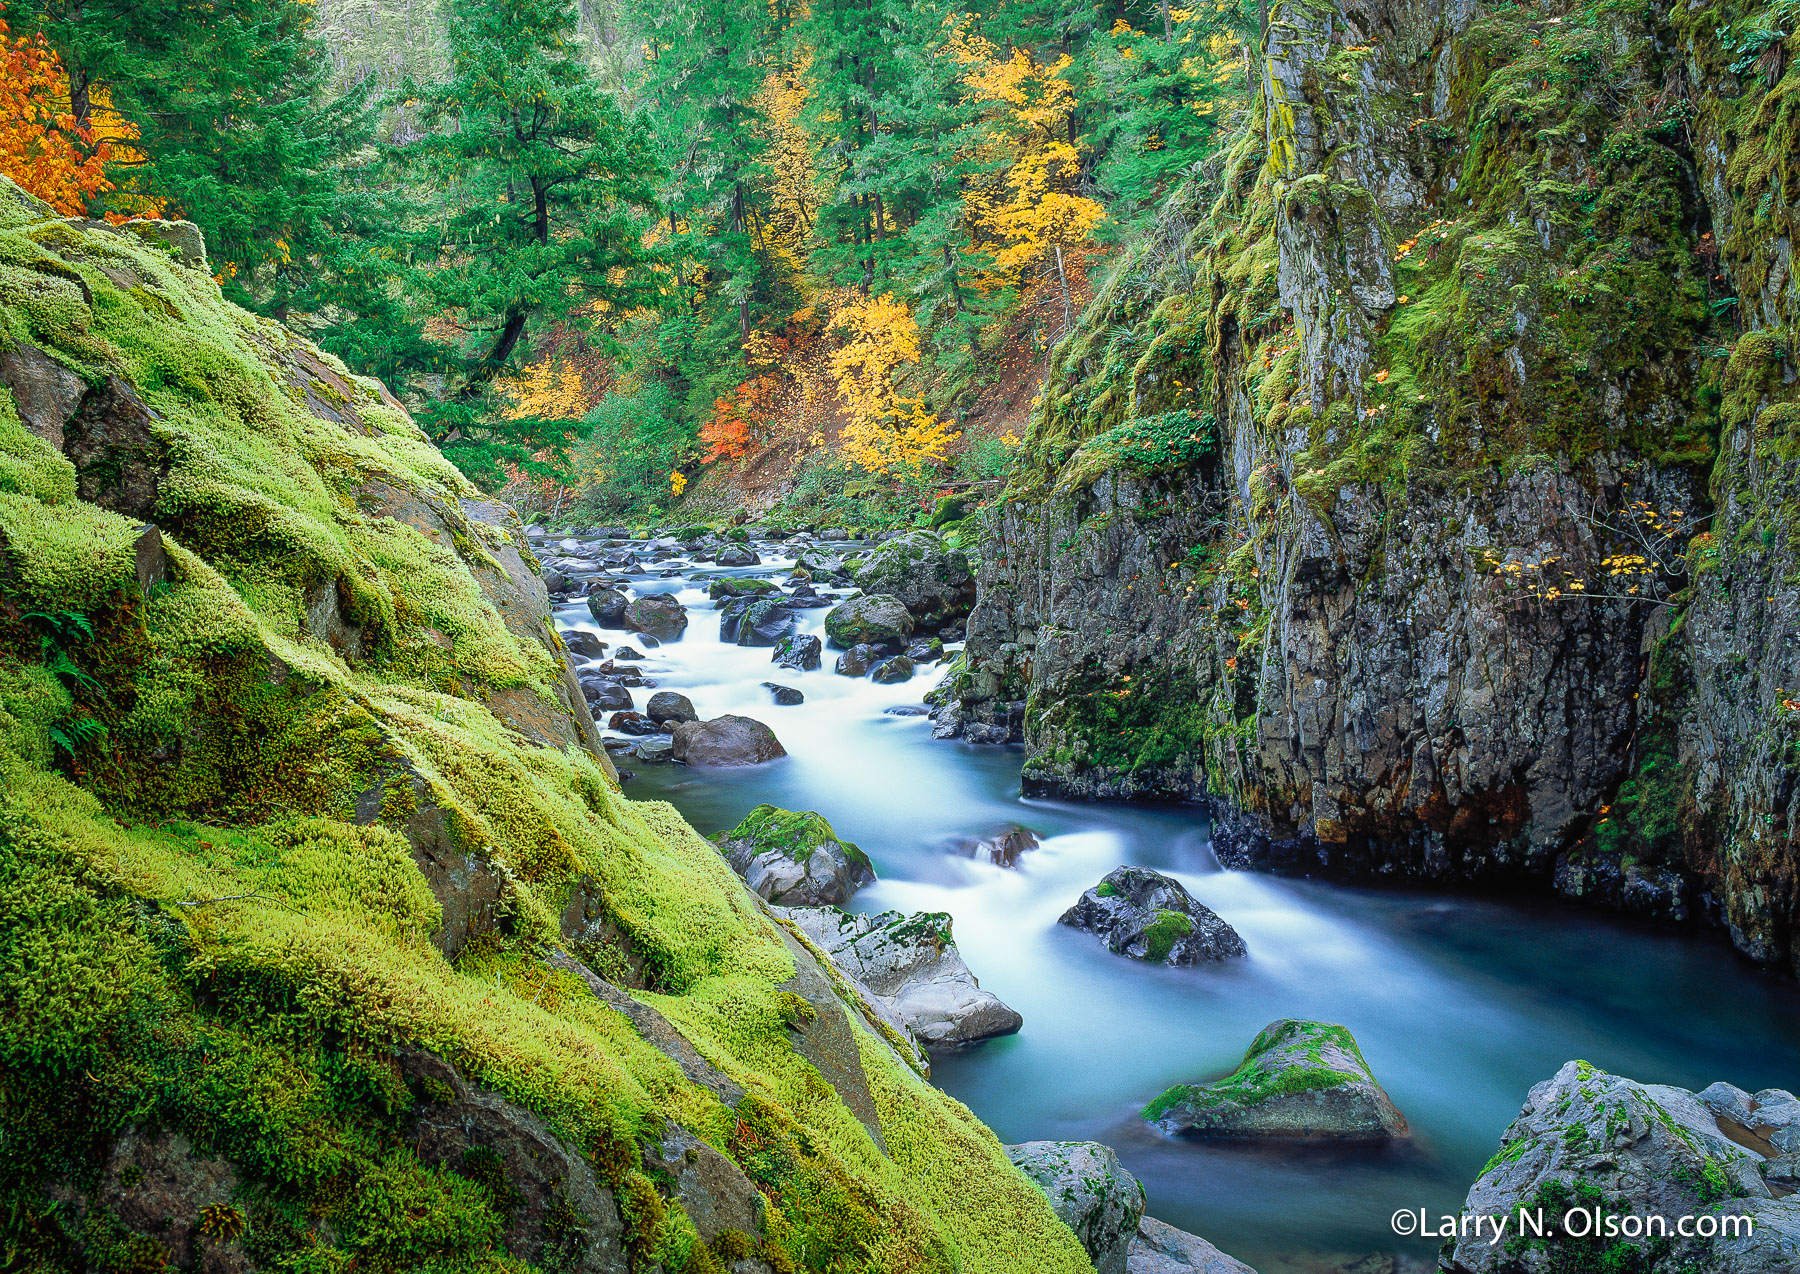 North Fork, Middle Fork, Willamette River, OR | The fall colors add a painterly  touch to a green mossy gorge with white water.